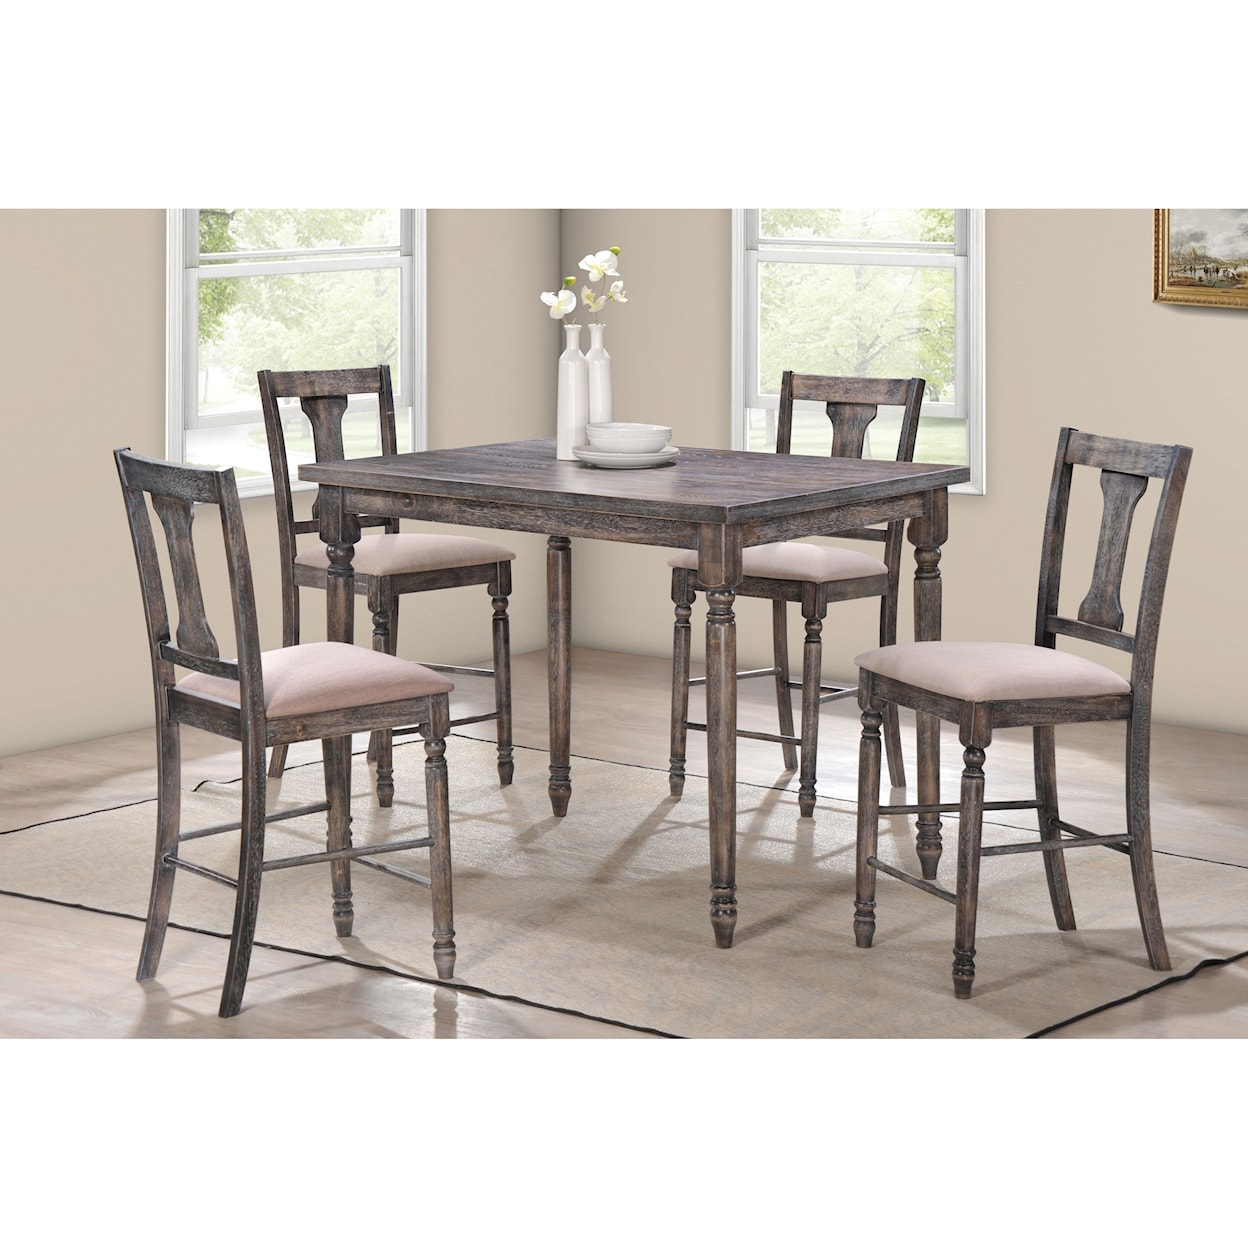 Acme Furniture Wallace Counter Height Dining Set with 4 Chairs